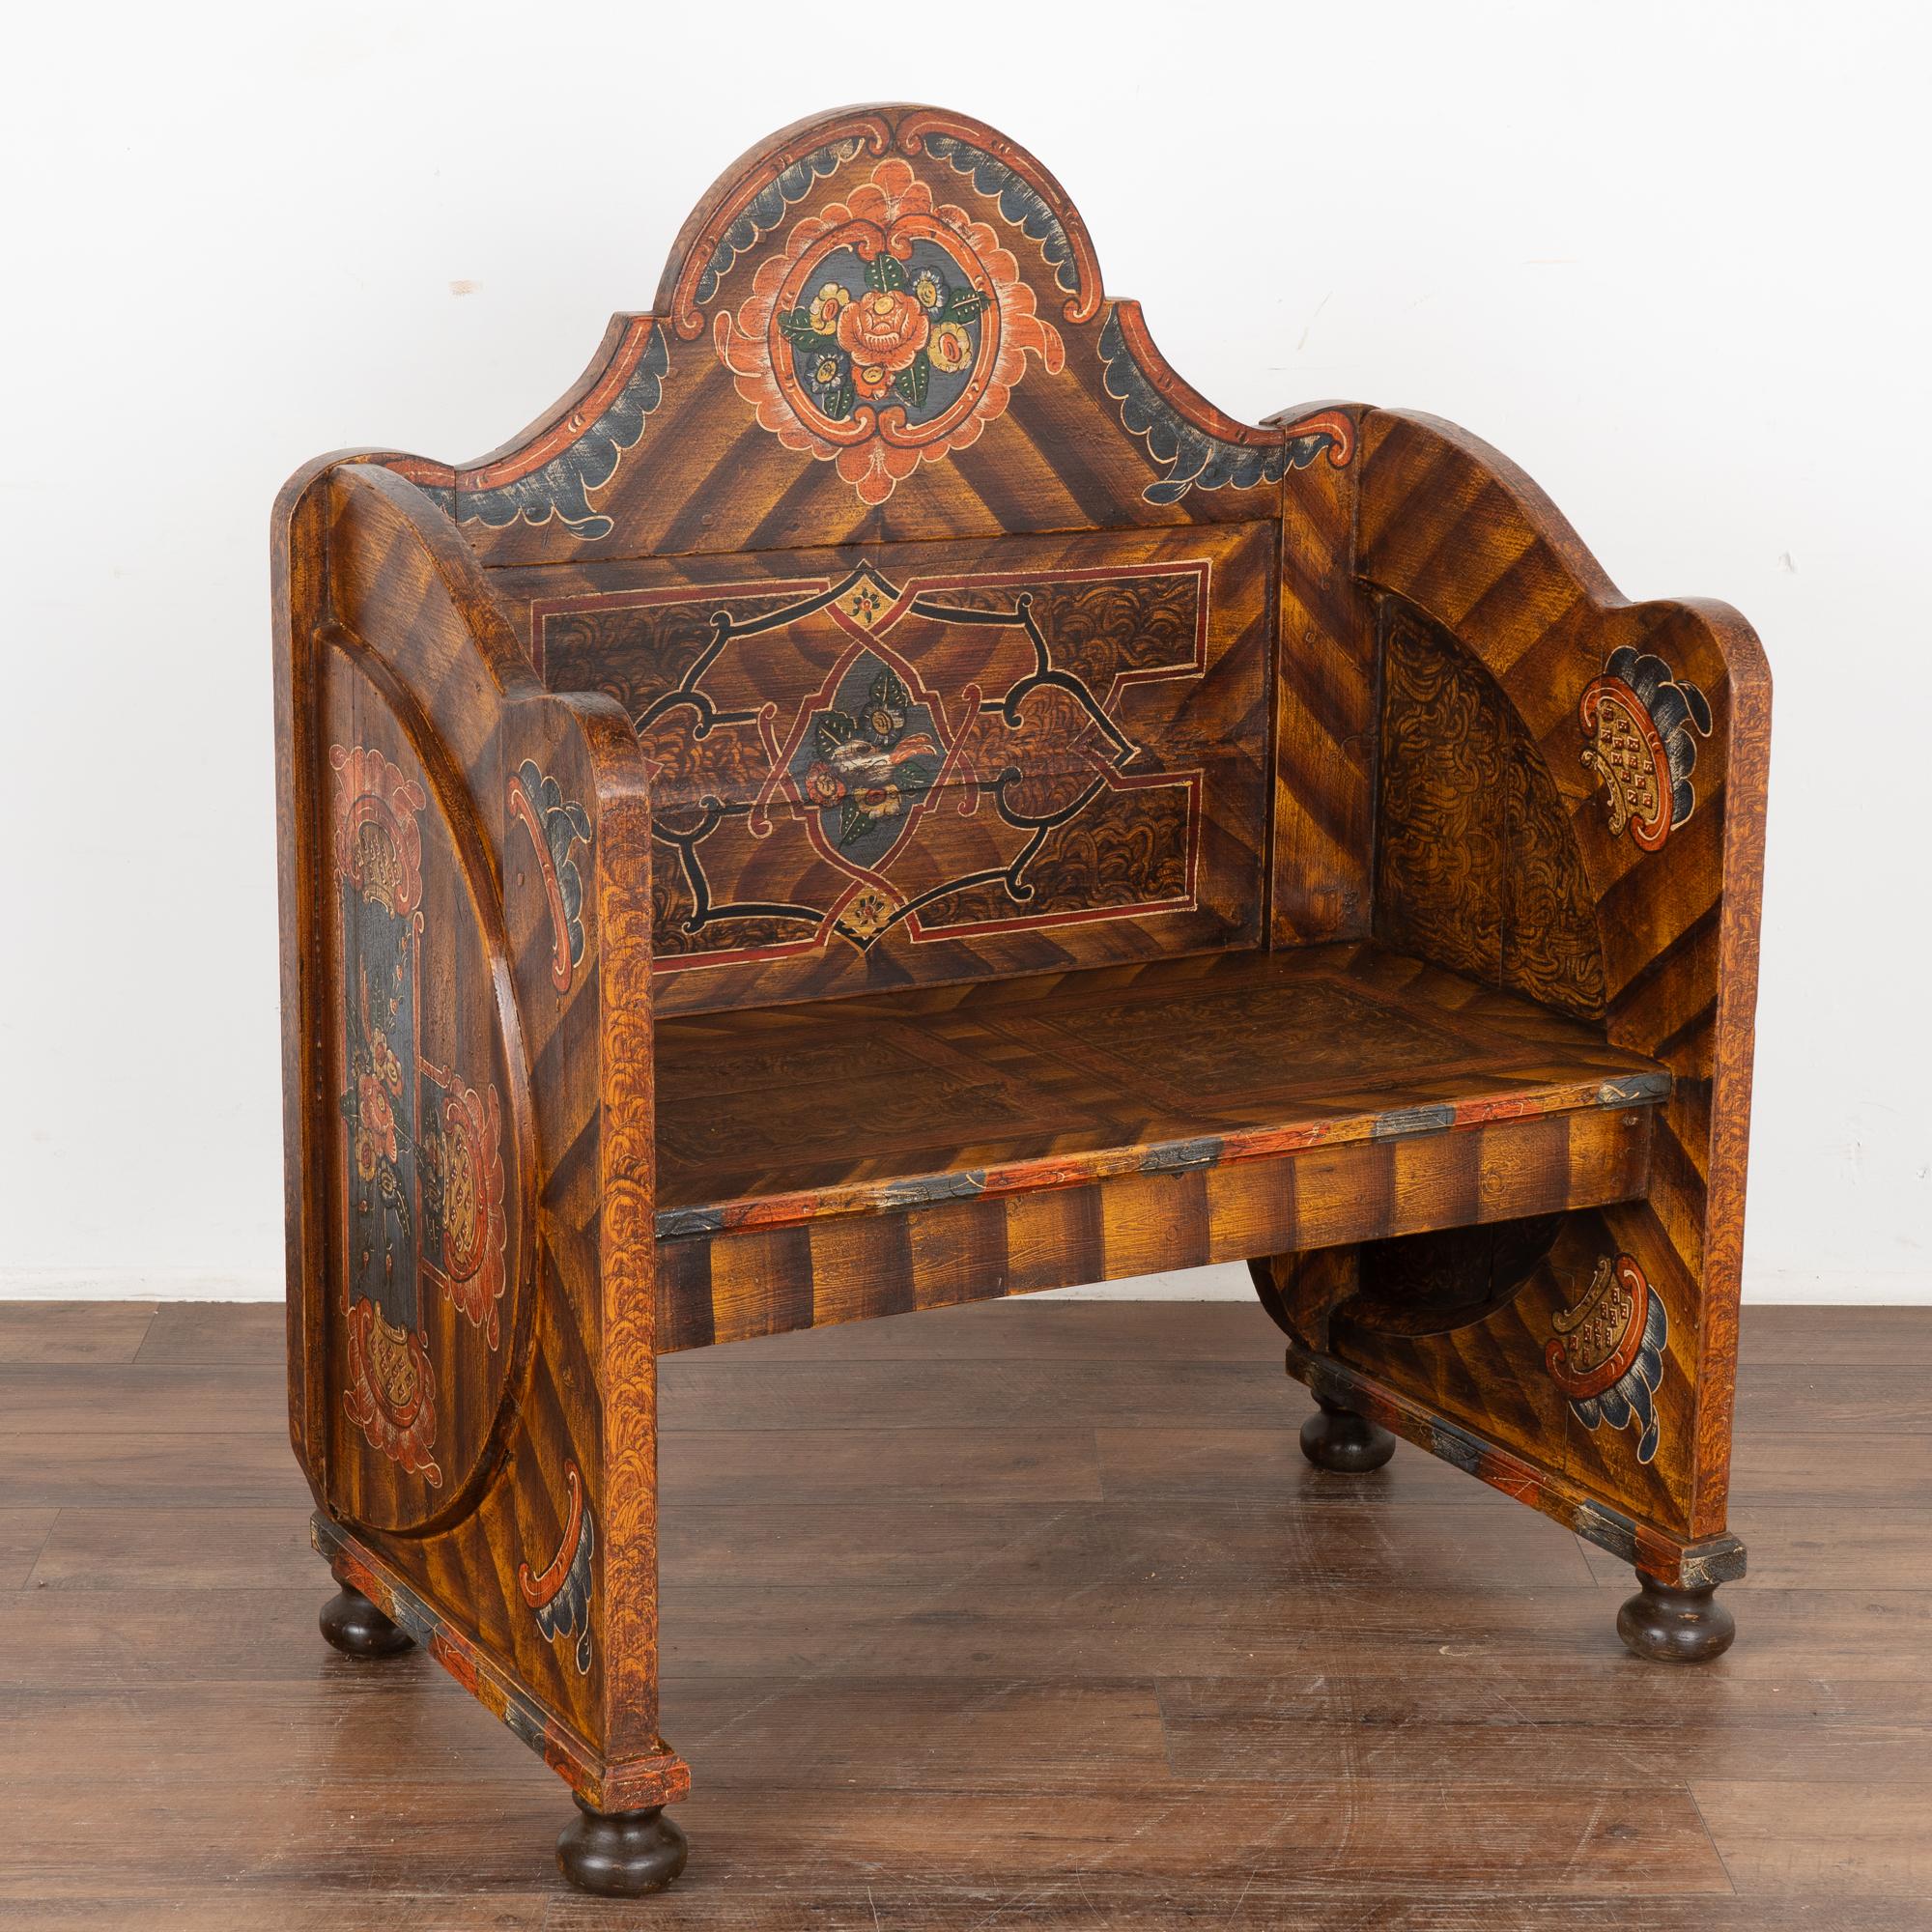 This delightful high back bench is a rare find due to it's unique small size and elaborate original hand-painted finish.
Please enlarge photos to appreciate the many details of the painted finish, with traditional faux wood background, orange/red,